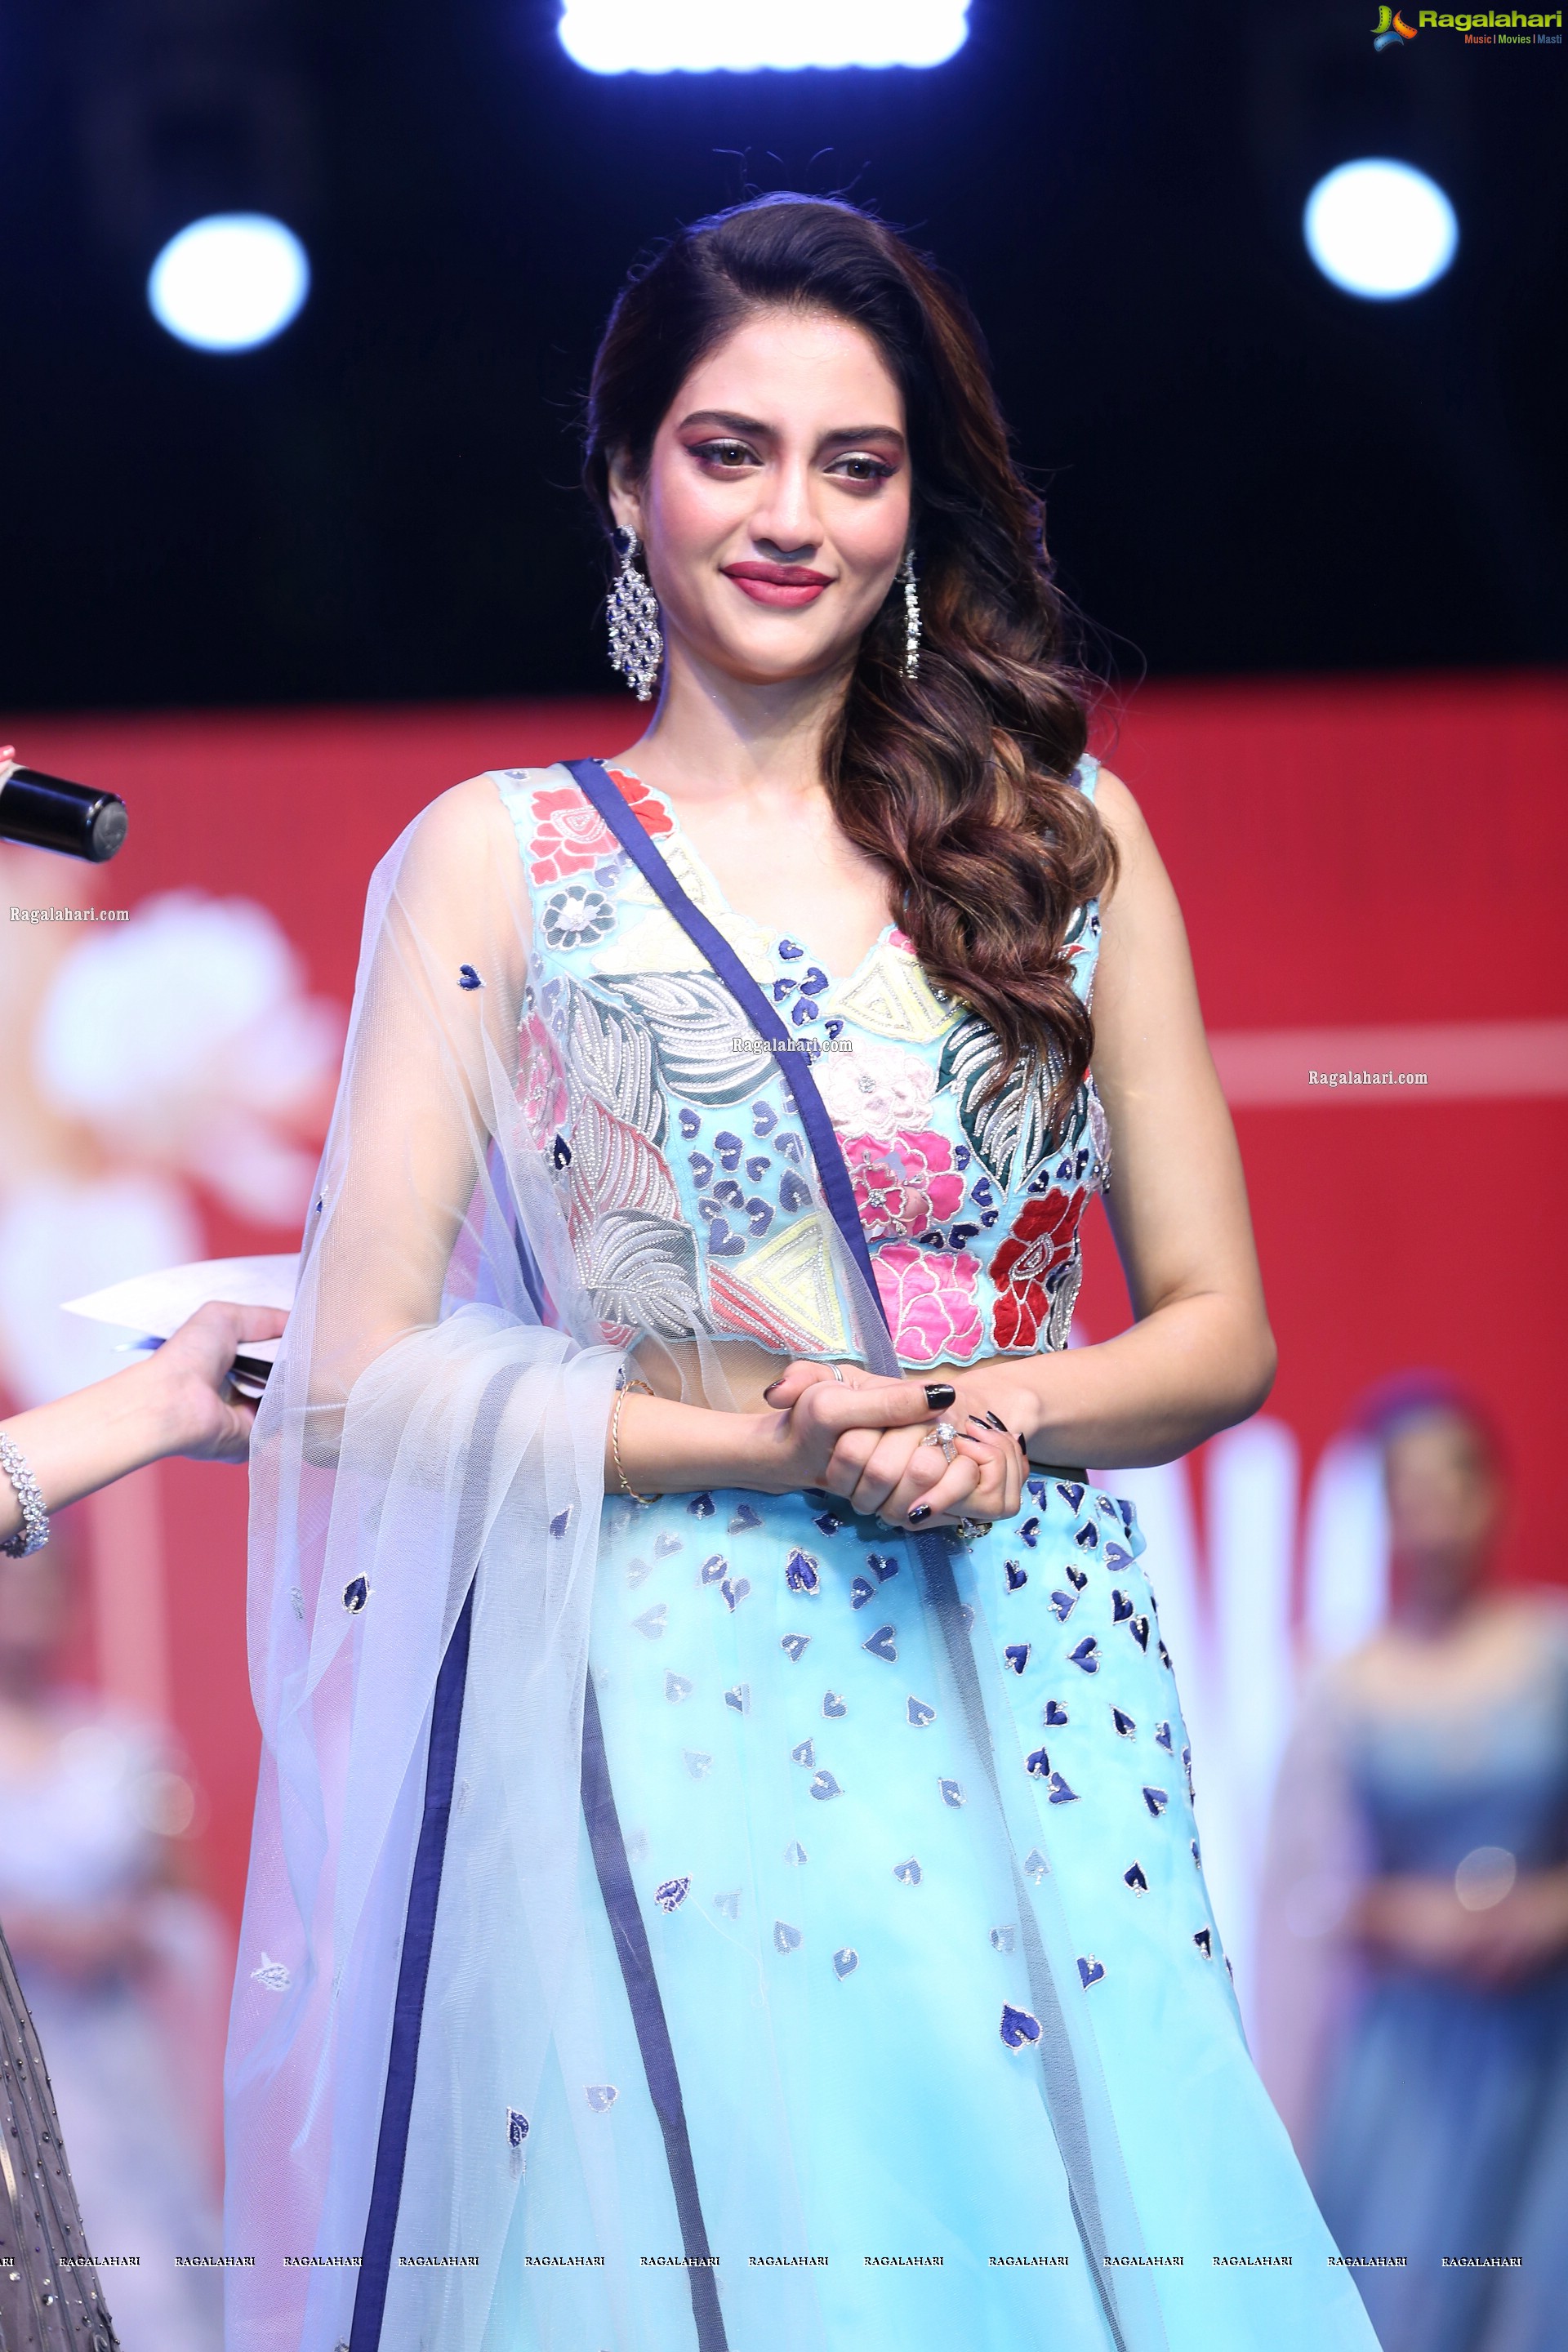 Nusrat Jahan Youve Launch at Rangoli and Fashion Show - HD Gallery